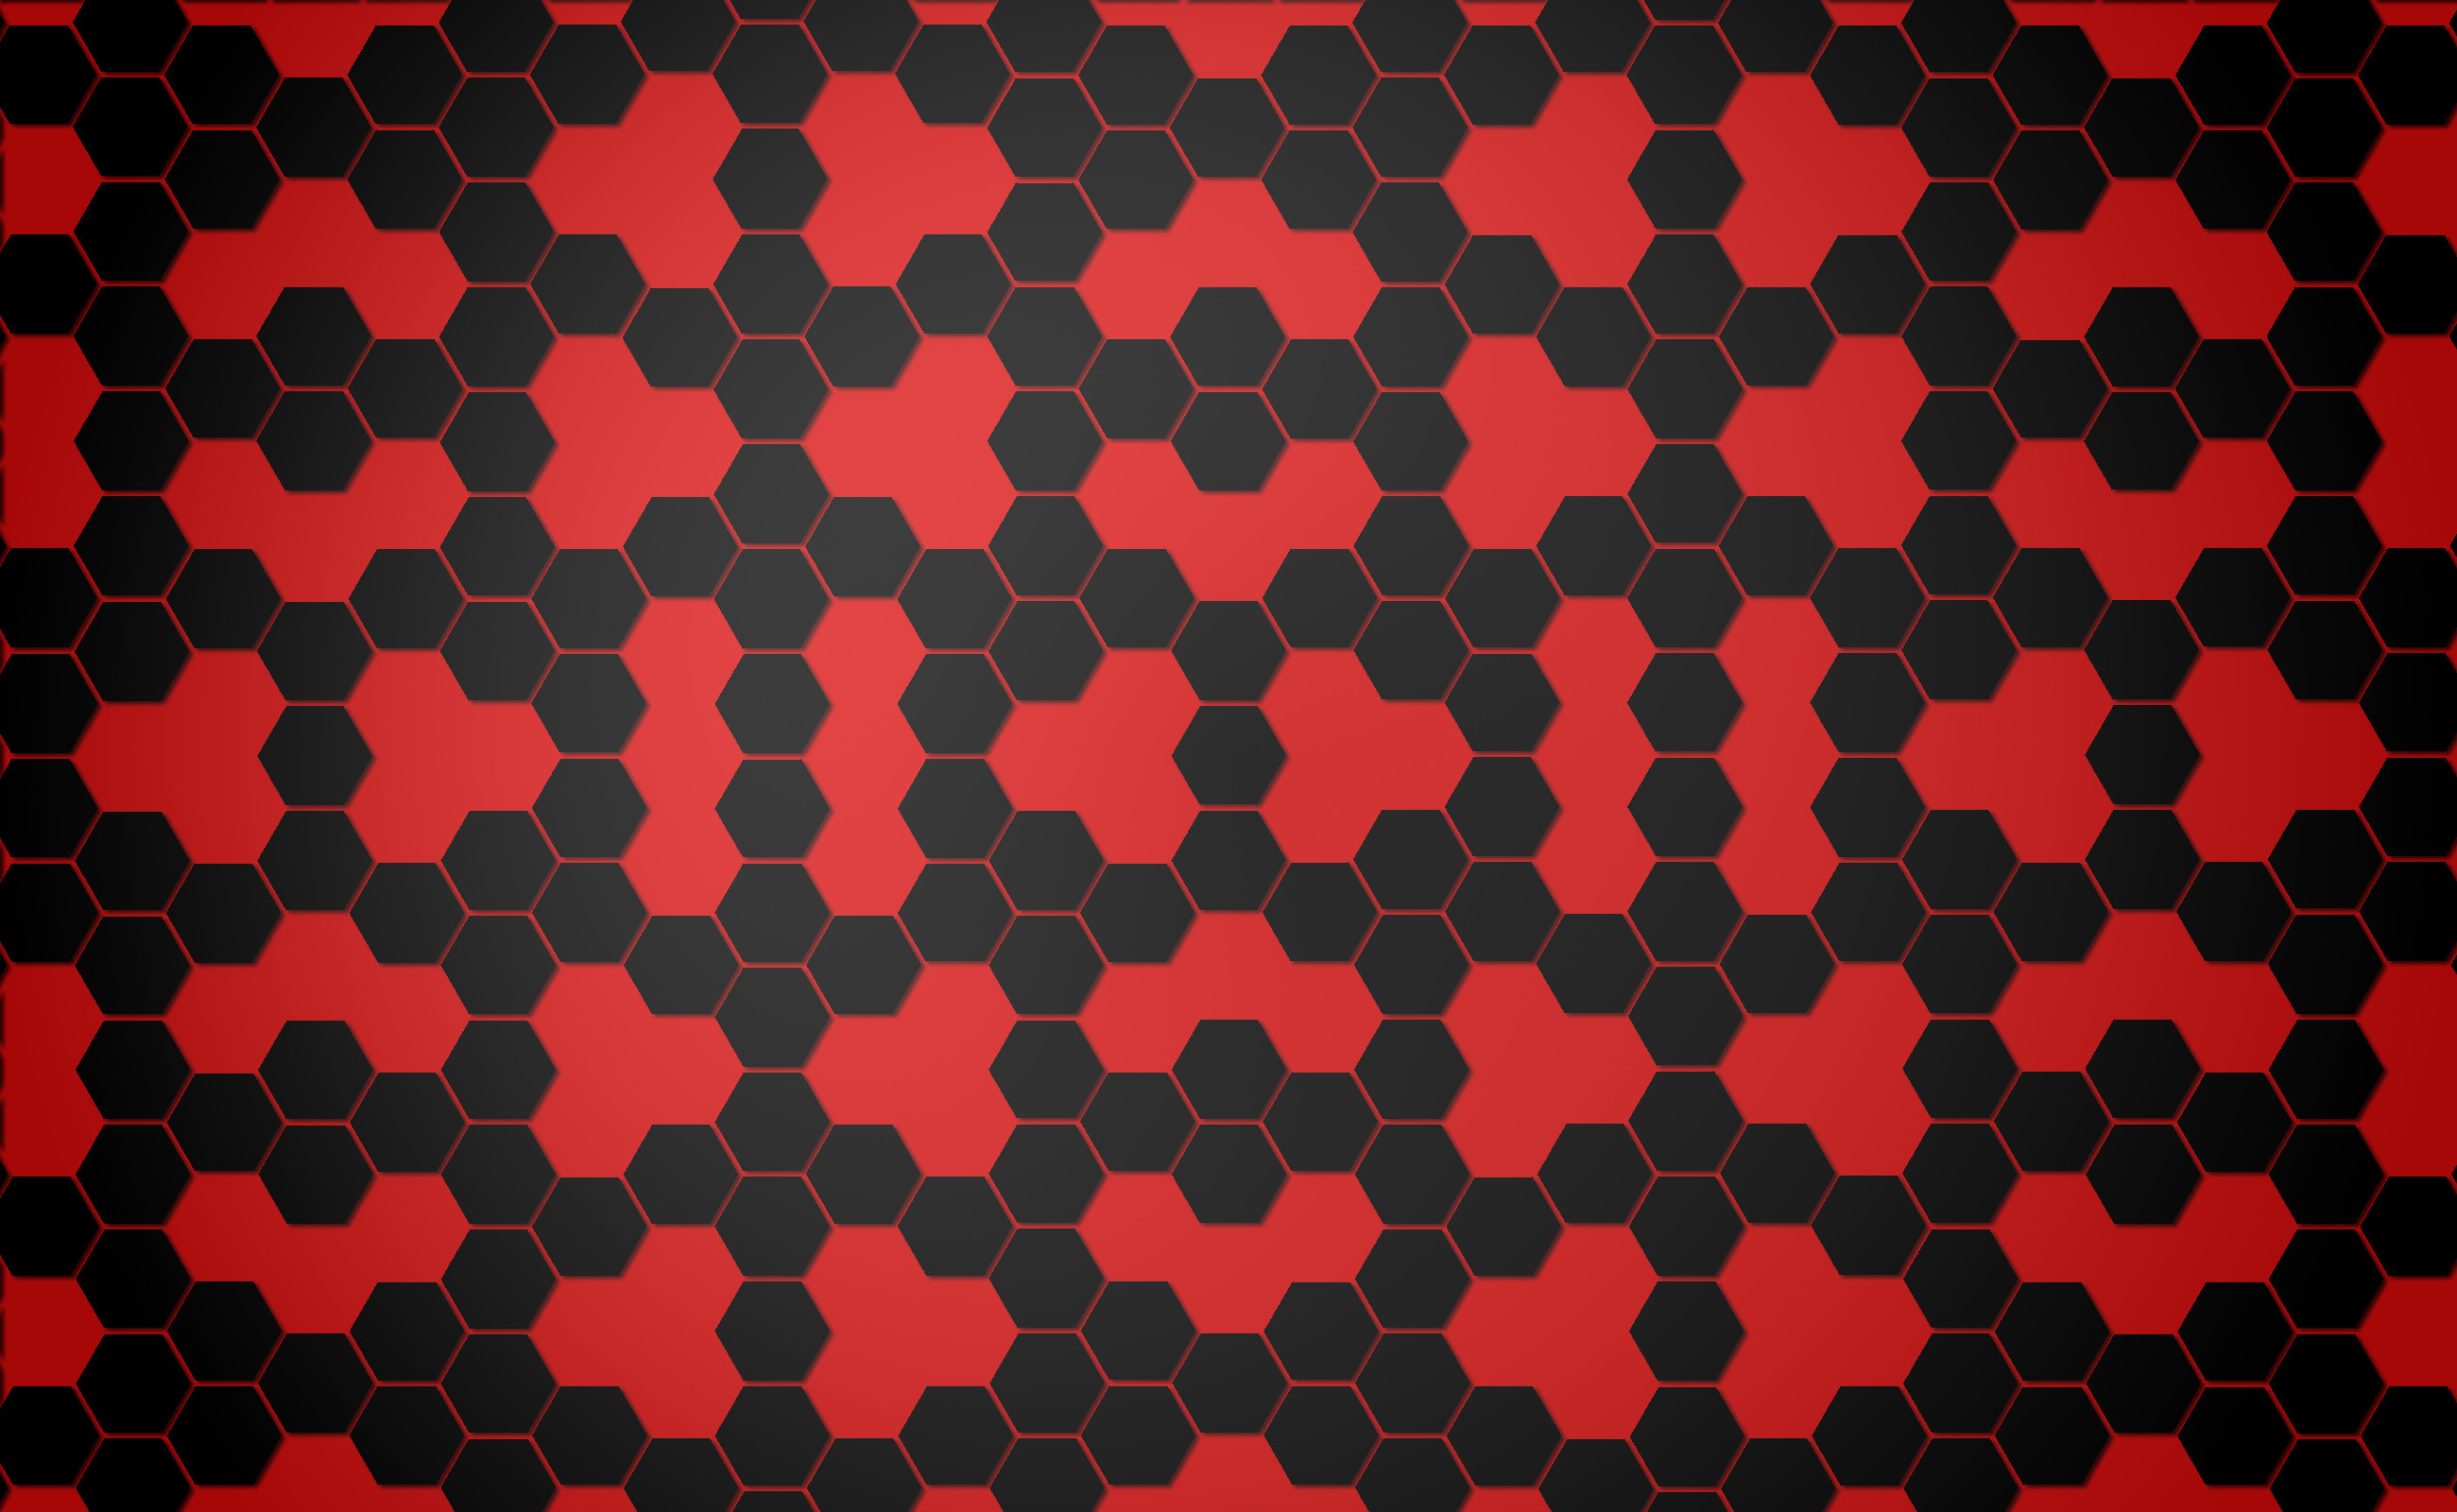 Black And Red Background Wallpaper 2 Wide Wallpaper. Black And Red Background Wallpaper 2 Wide Wallpaper